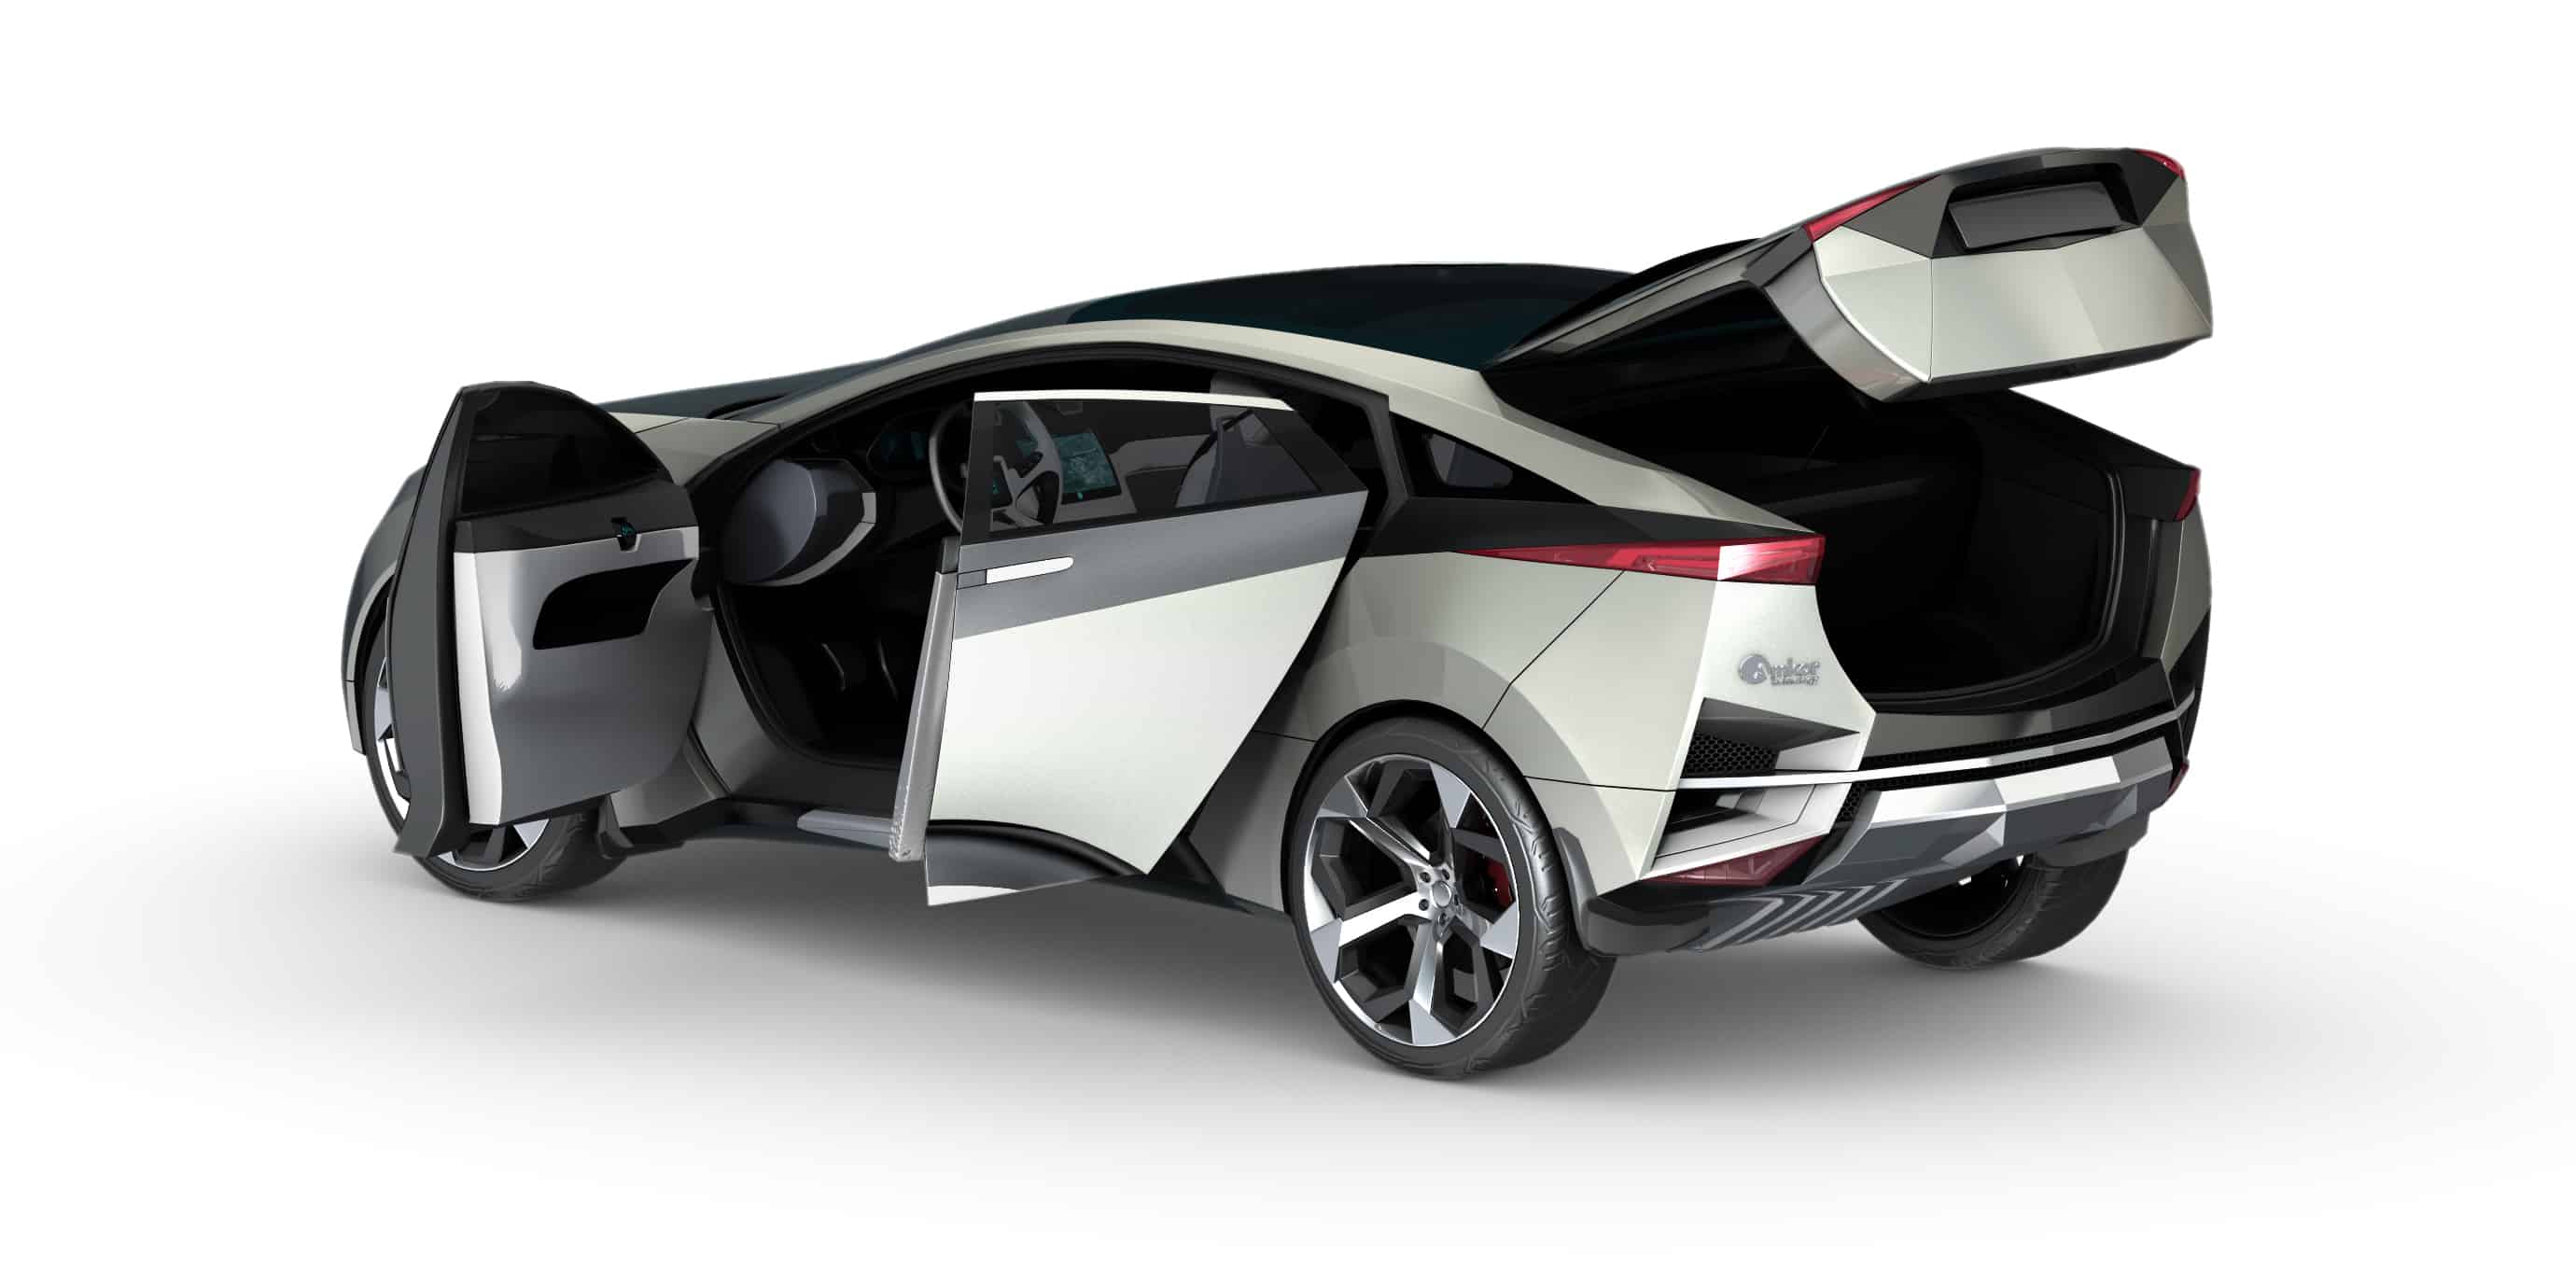 Futuristic car with doors and back hatch opened